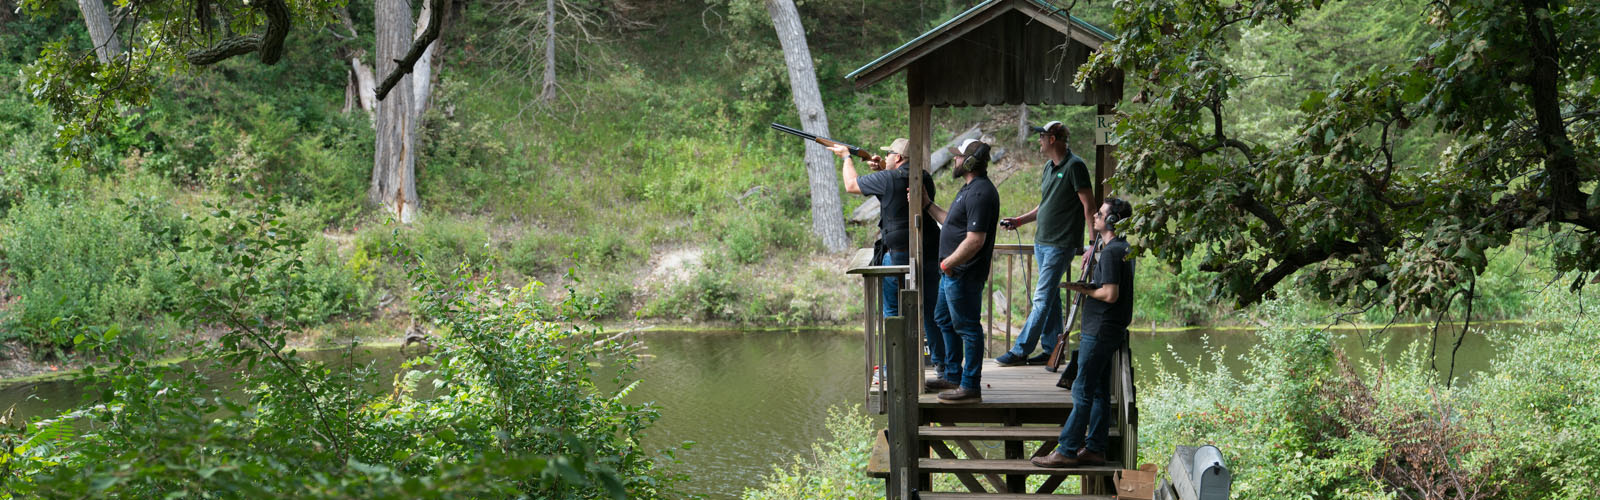 Tradition of Excellence Sporting Clay Event